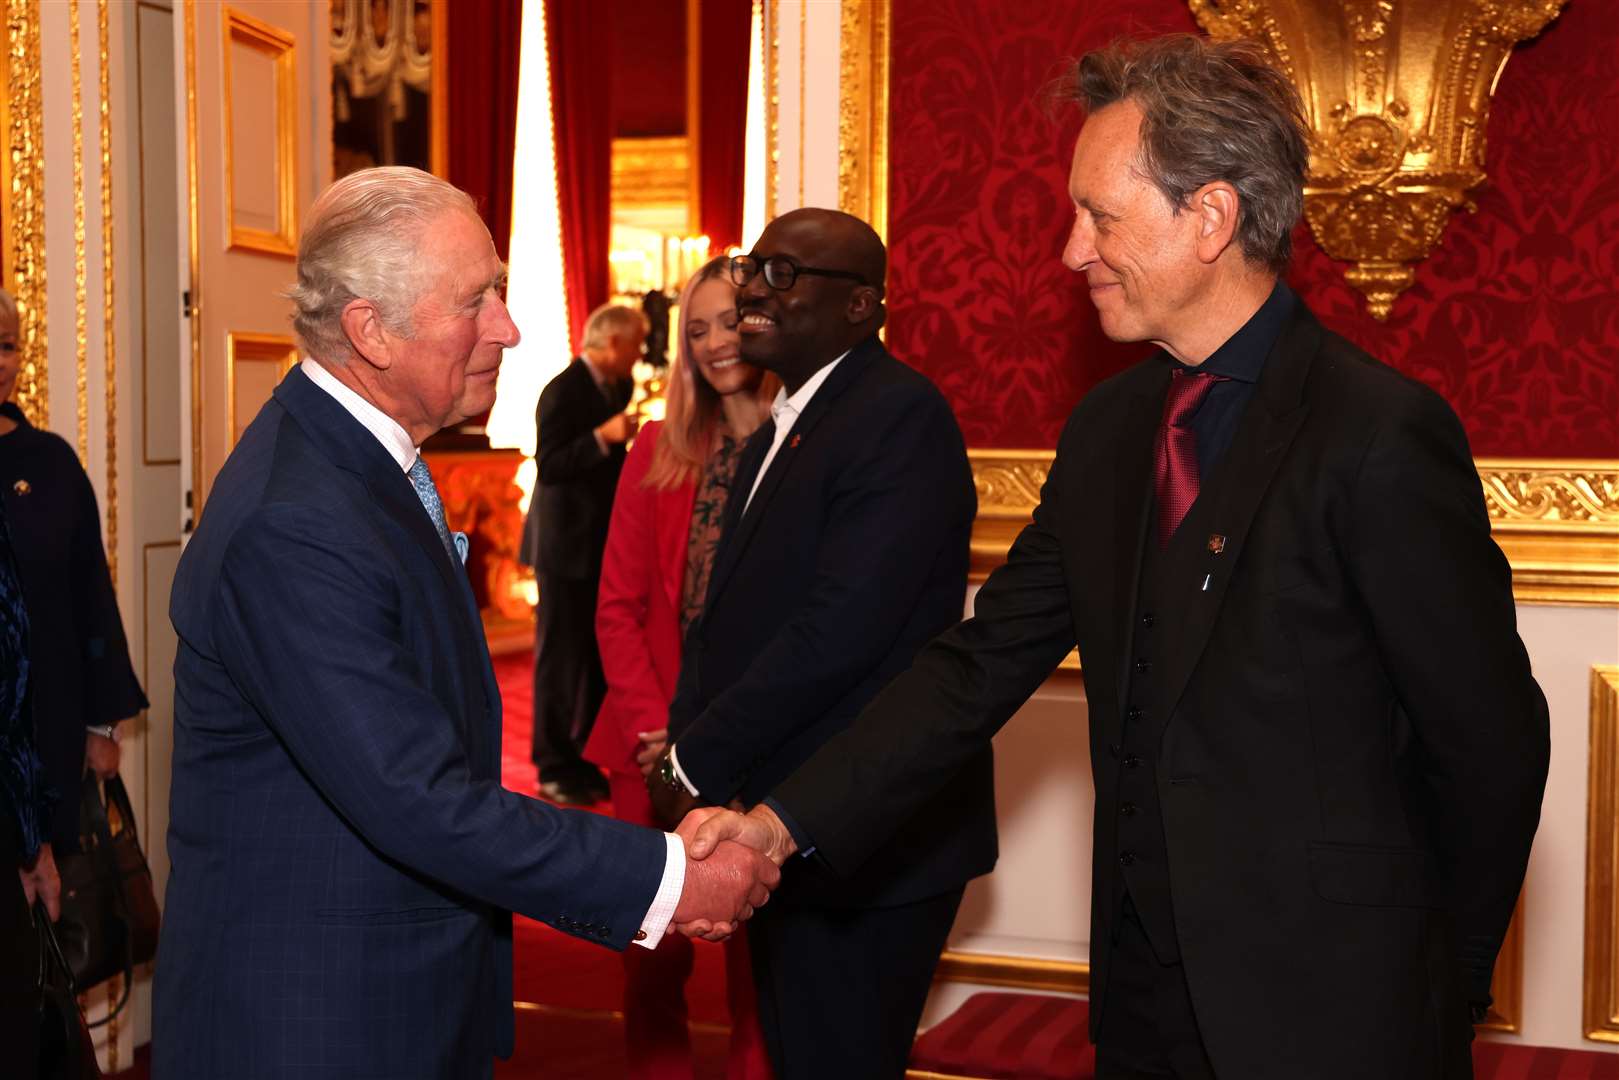 Charles meets Richard E Grant at the Prince’s Trust awards ceremony (Tim P. Whitby/PA)